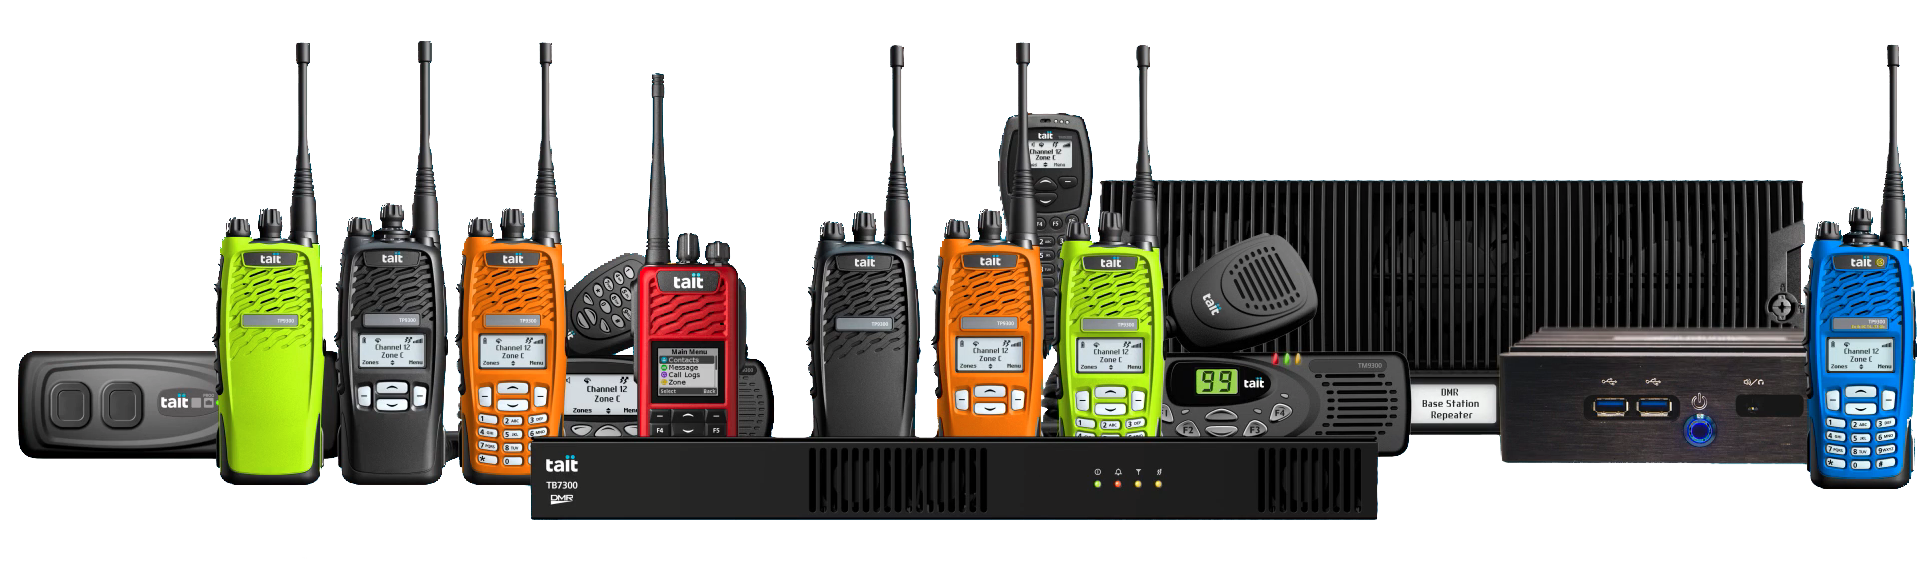 Assortment of Portable, Mobile, and Base Station Radios from Tait